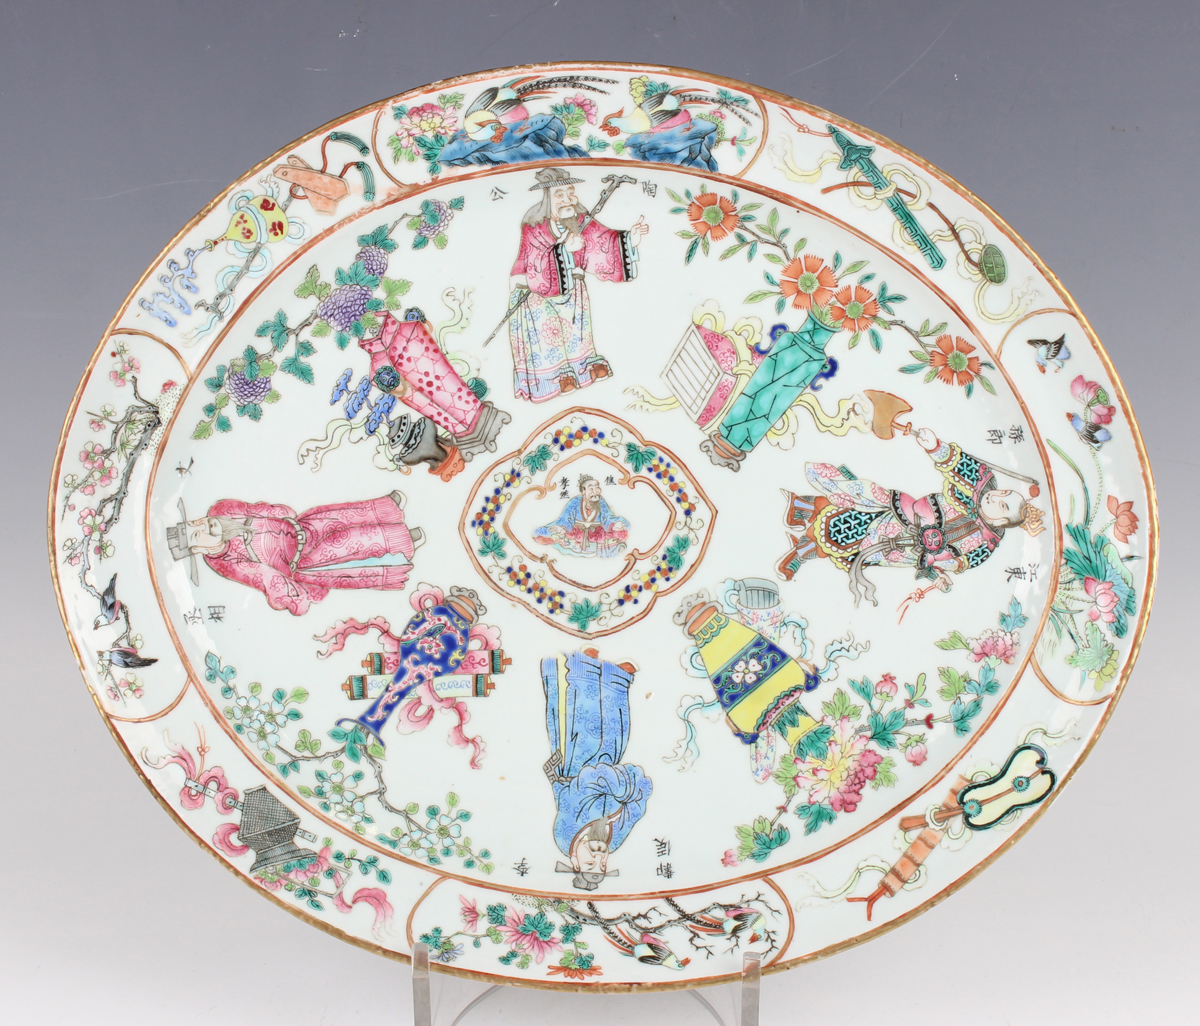 A Chinese Canton famille rose porcelain oval meat dish, mid-19th century, painted with four